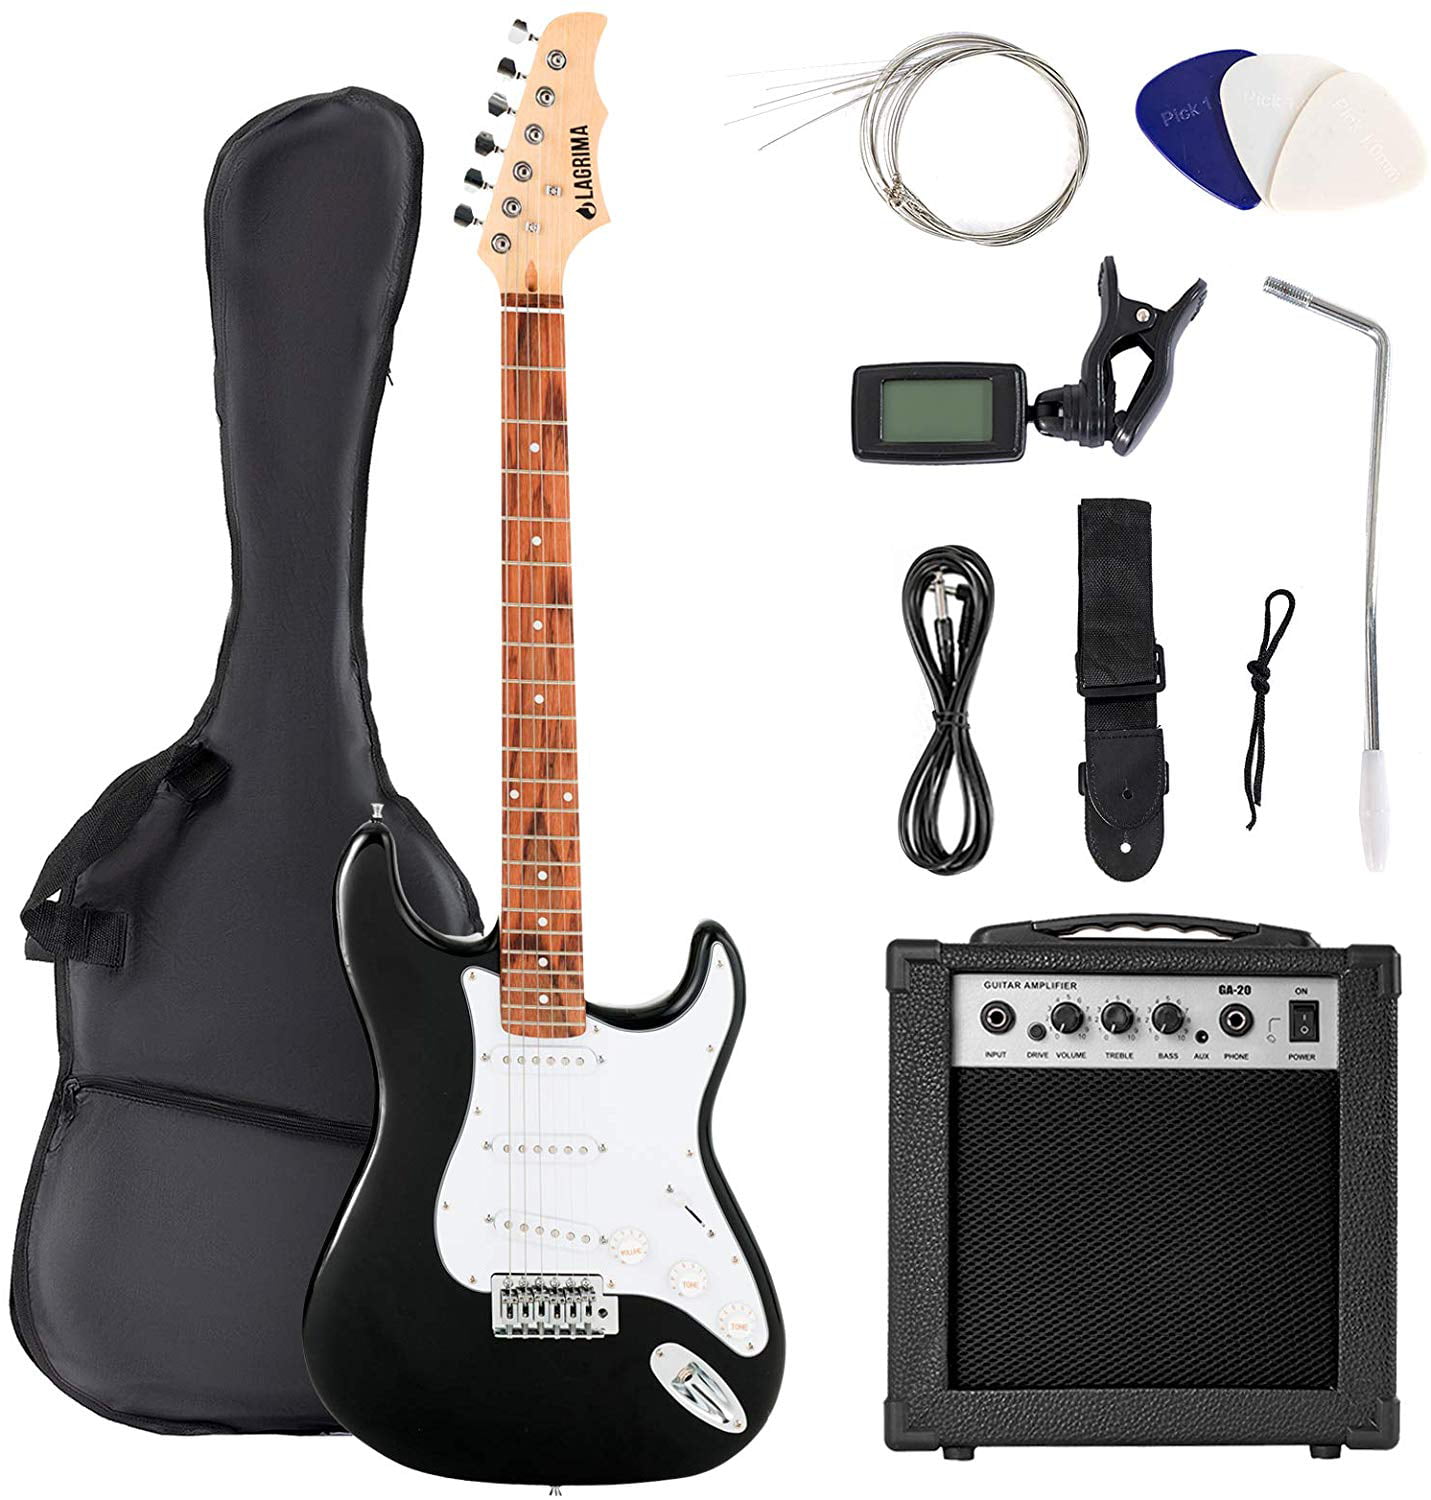 Starshine 12 String Full Size Electric Guitar Solid Body Beginner Kit with Bag Cable,Amplifier ST Bourbon burst